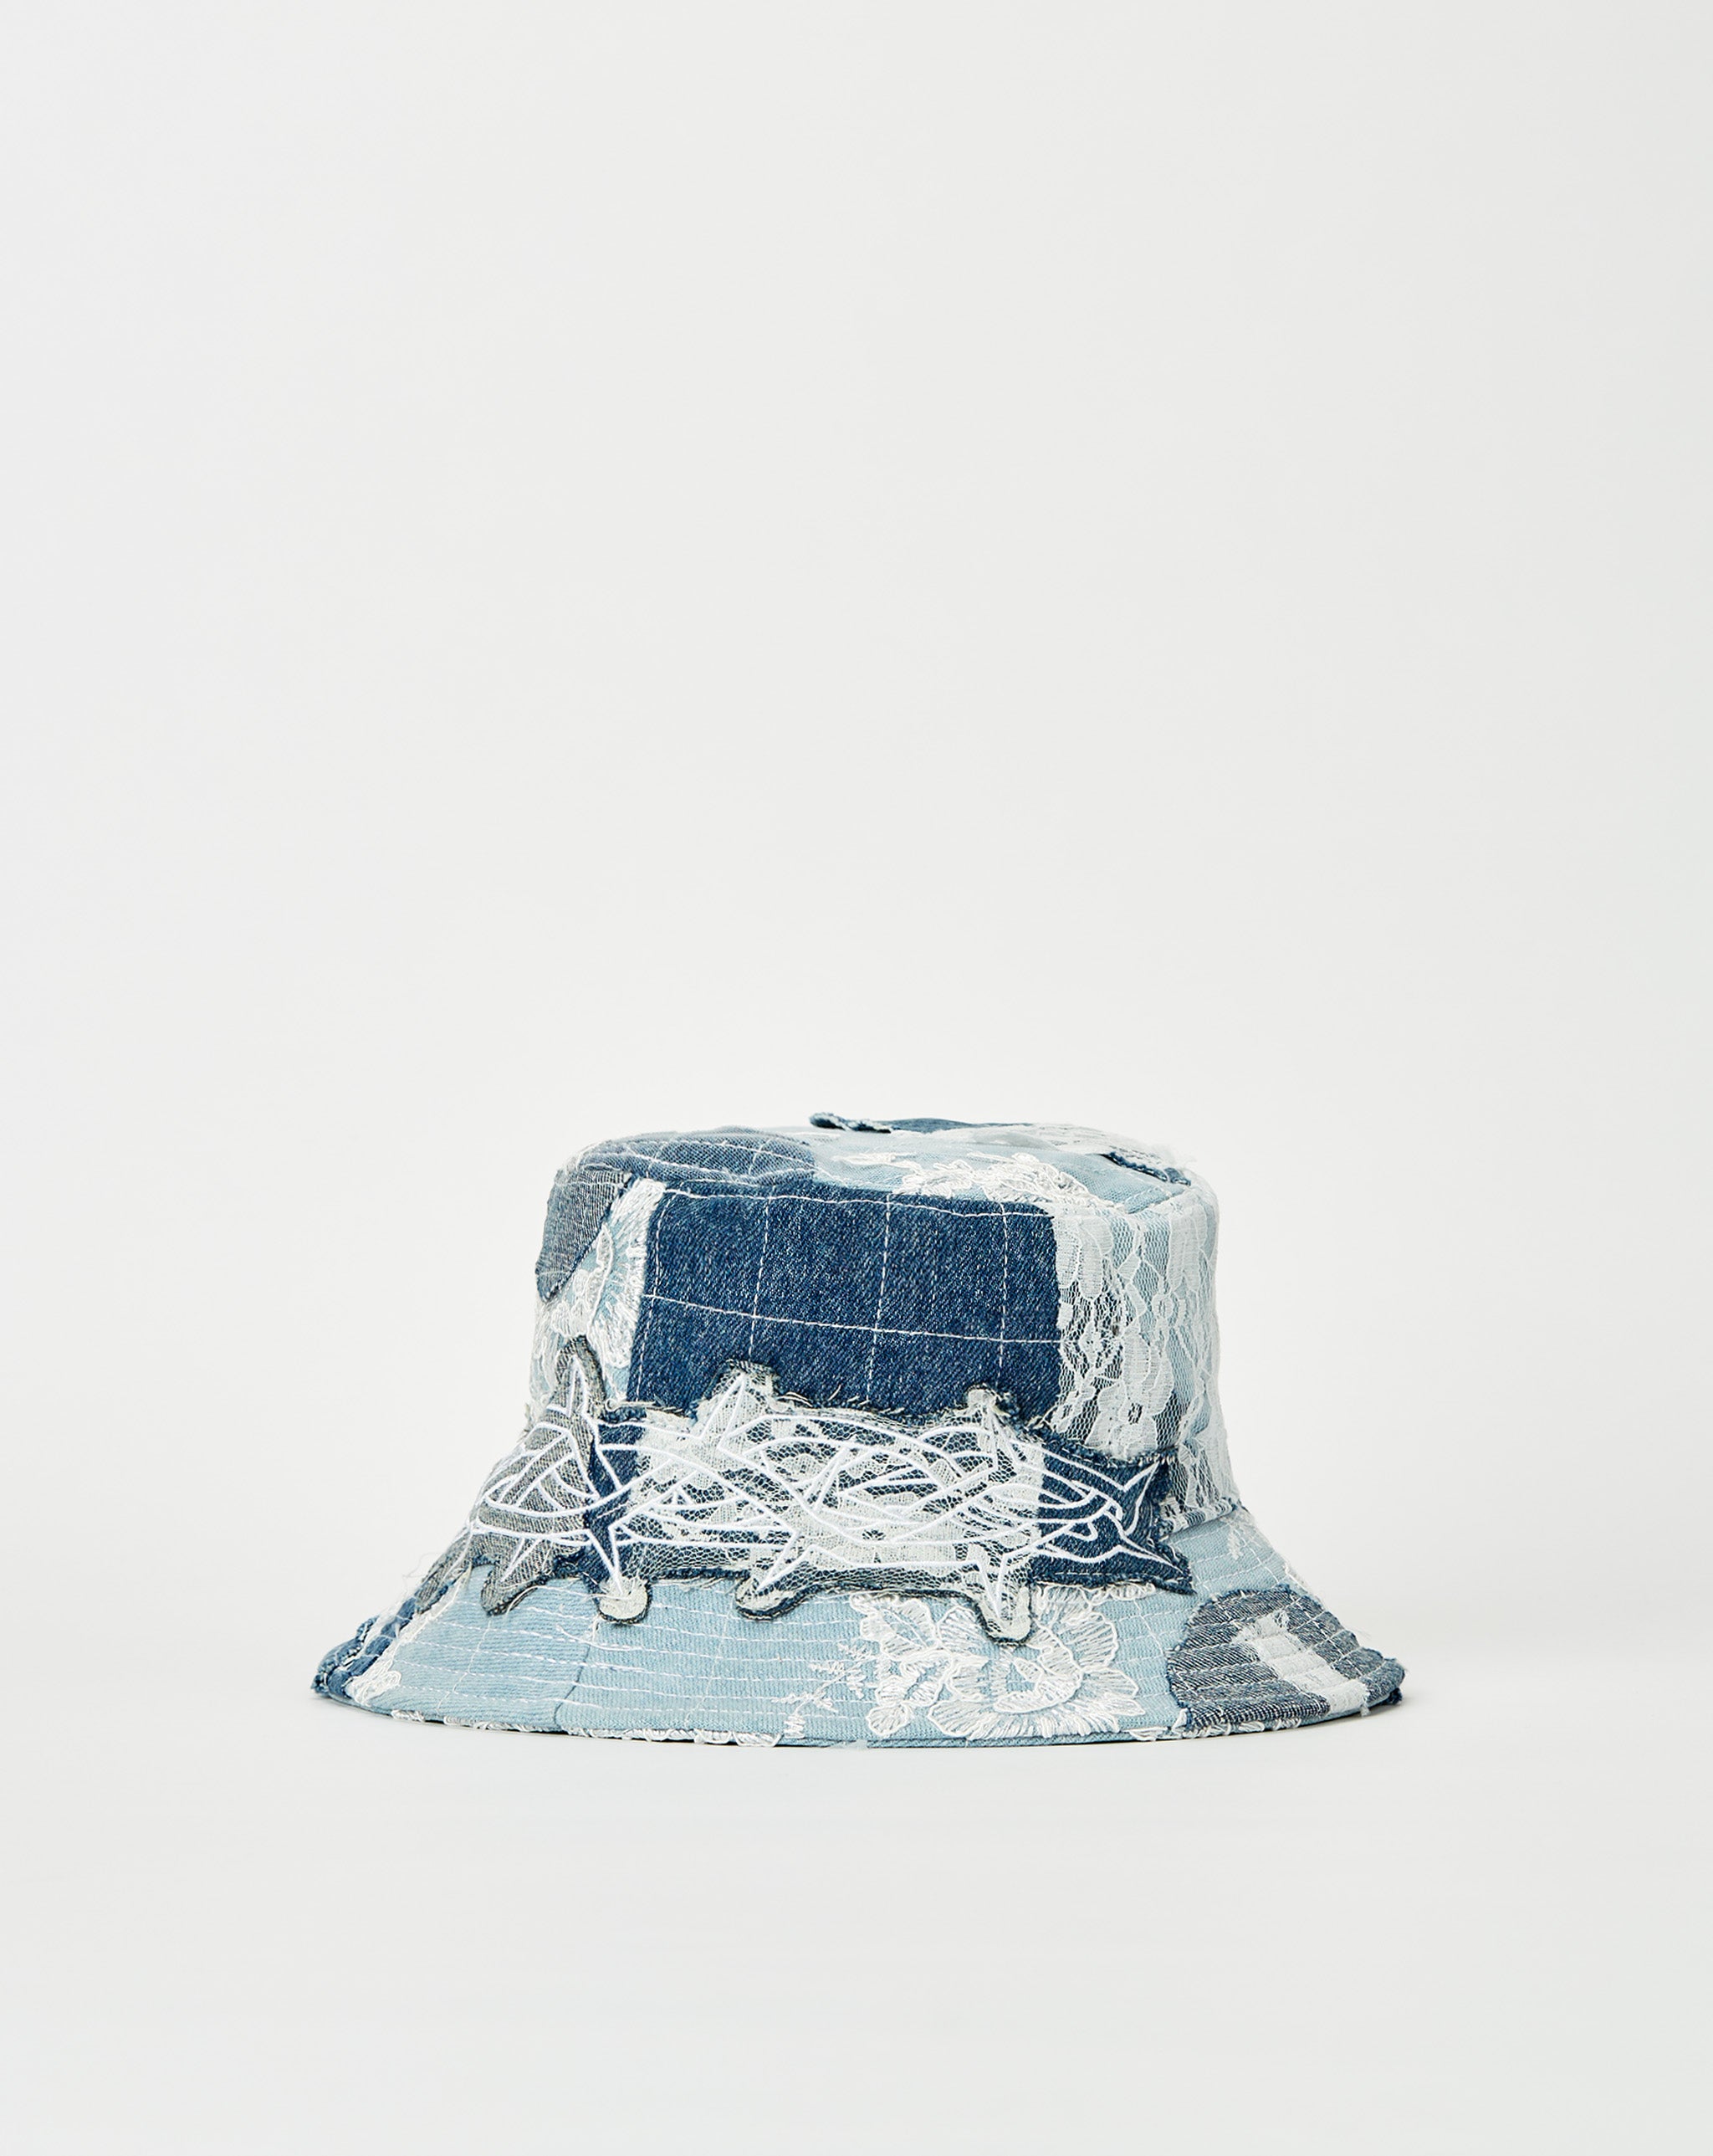 Who Decides War Thorn Wrapped Grid Bucket Hat  - XHIBITION